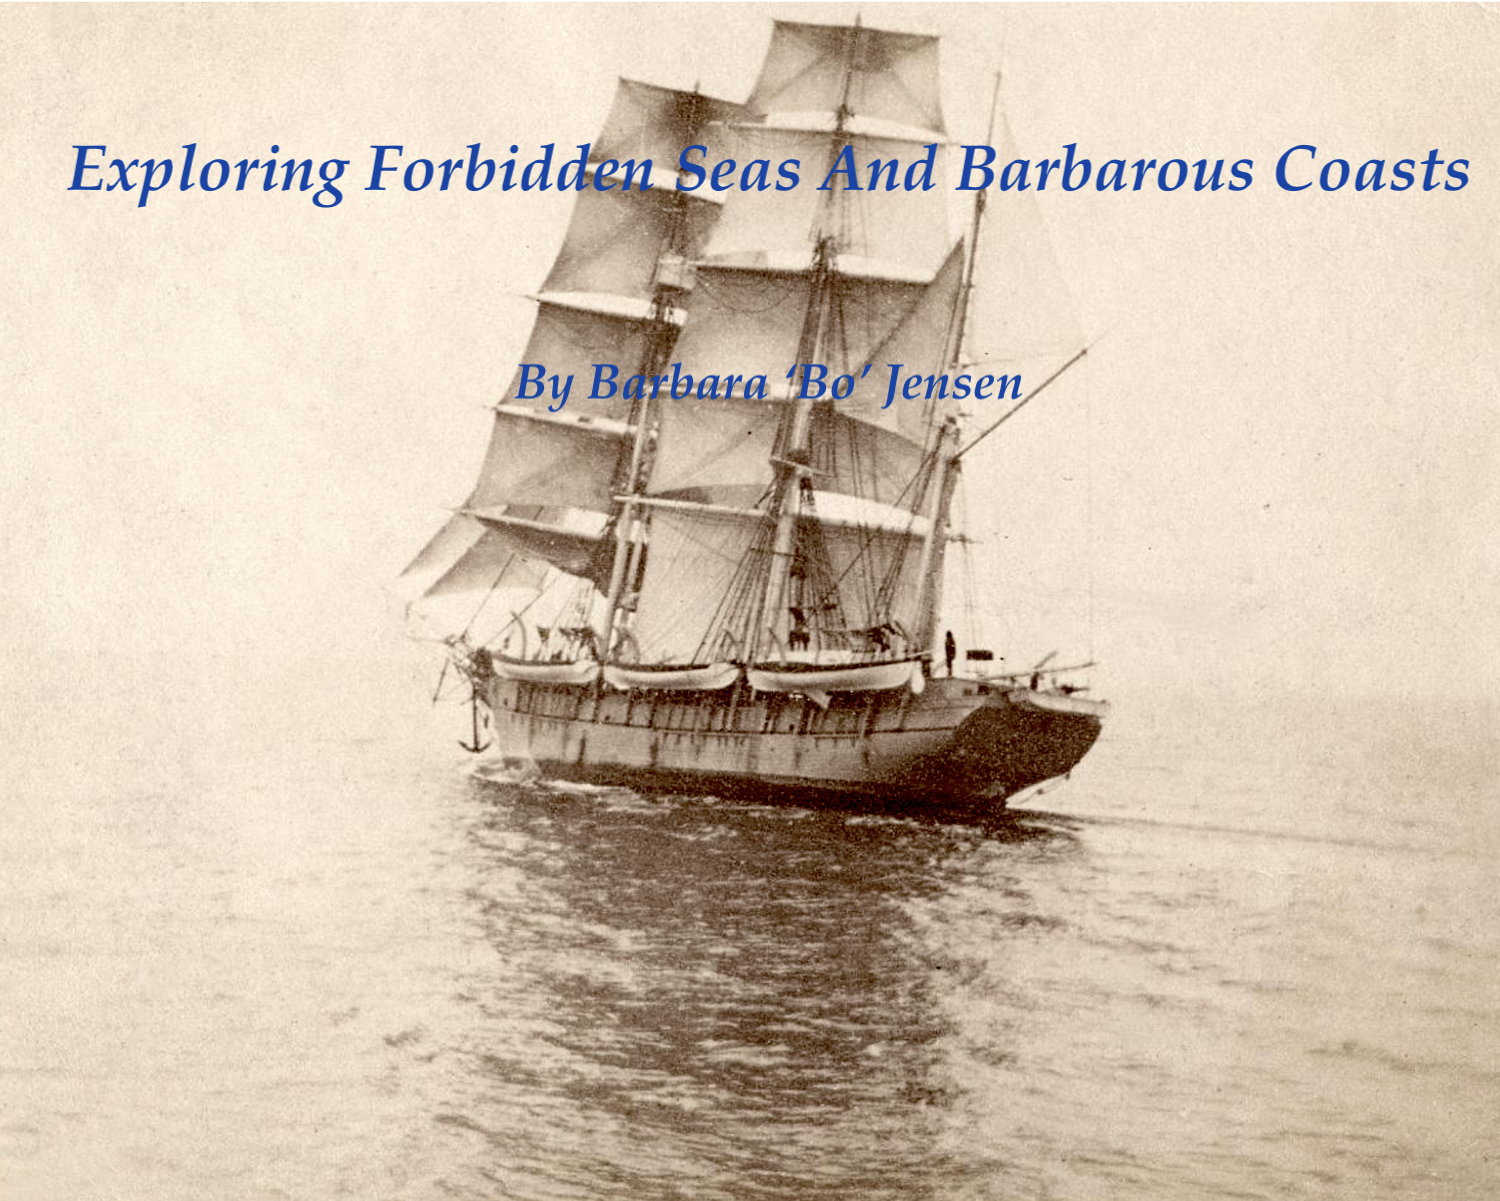 New Bedford Whaling National Historical Park/NPS archives